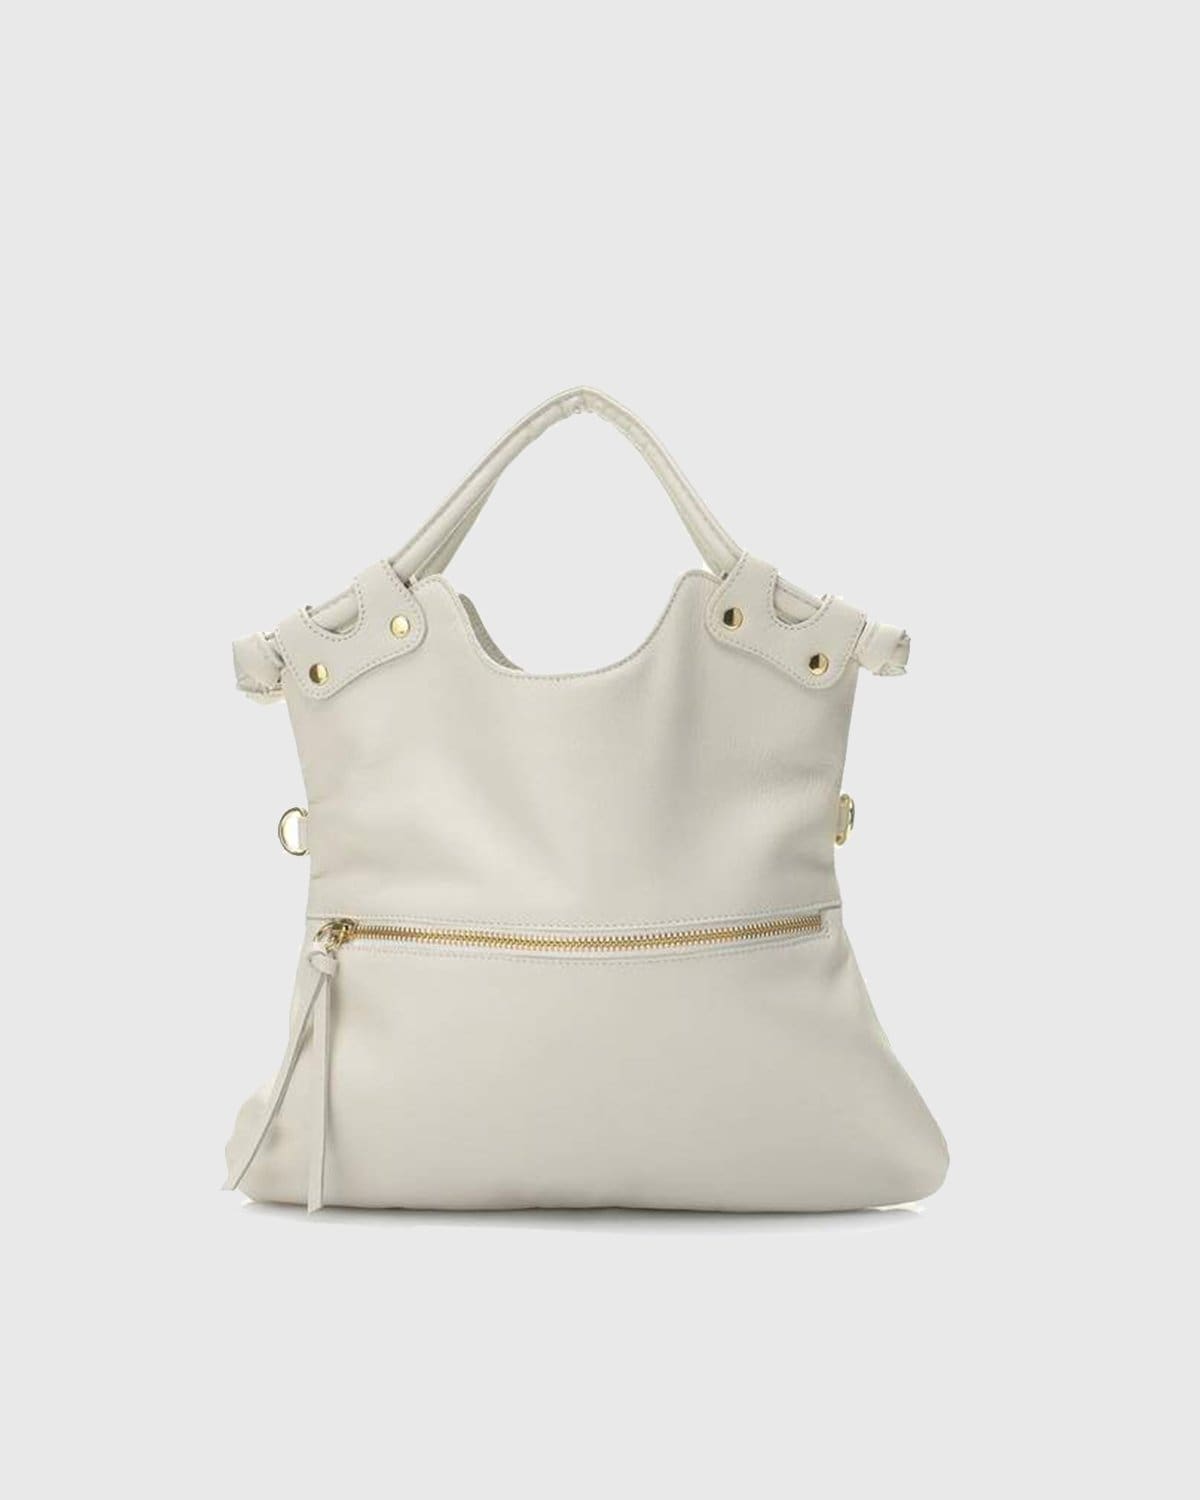 Brooklyn - Off White Leather Handbag Made in NYC | Pietro NYC